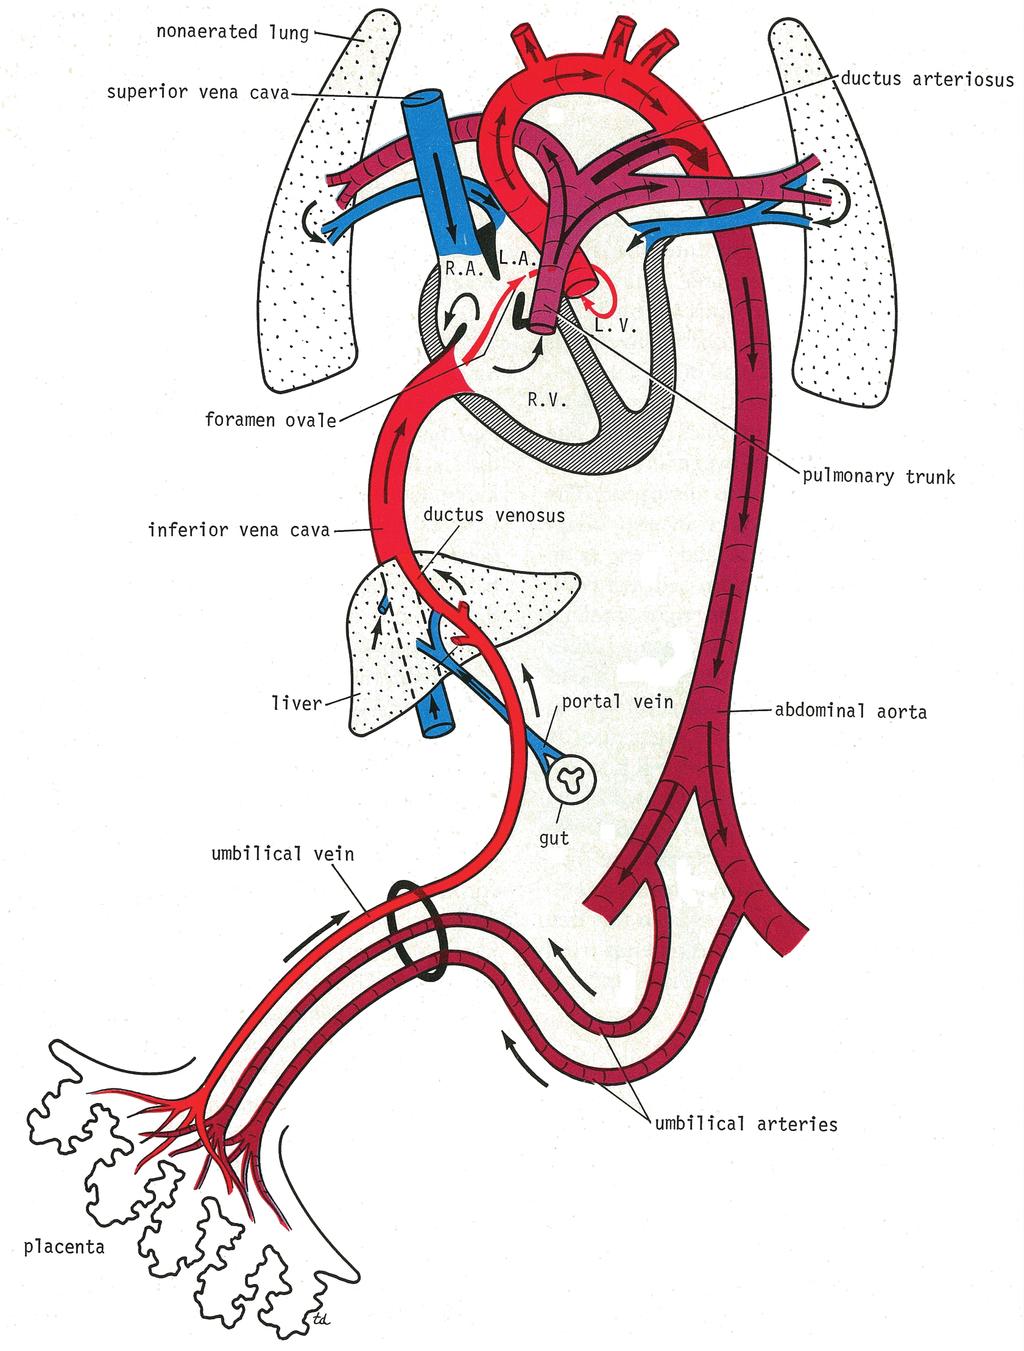 The Blood Vessels of the Thorax 85 CD Figure 5-6 Fetal circulation. R.A. right atrium, R.V. right ventricle, L.A. left atrium, L.V. left ventricle.